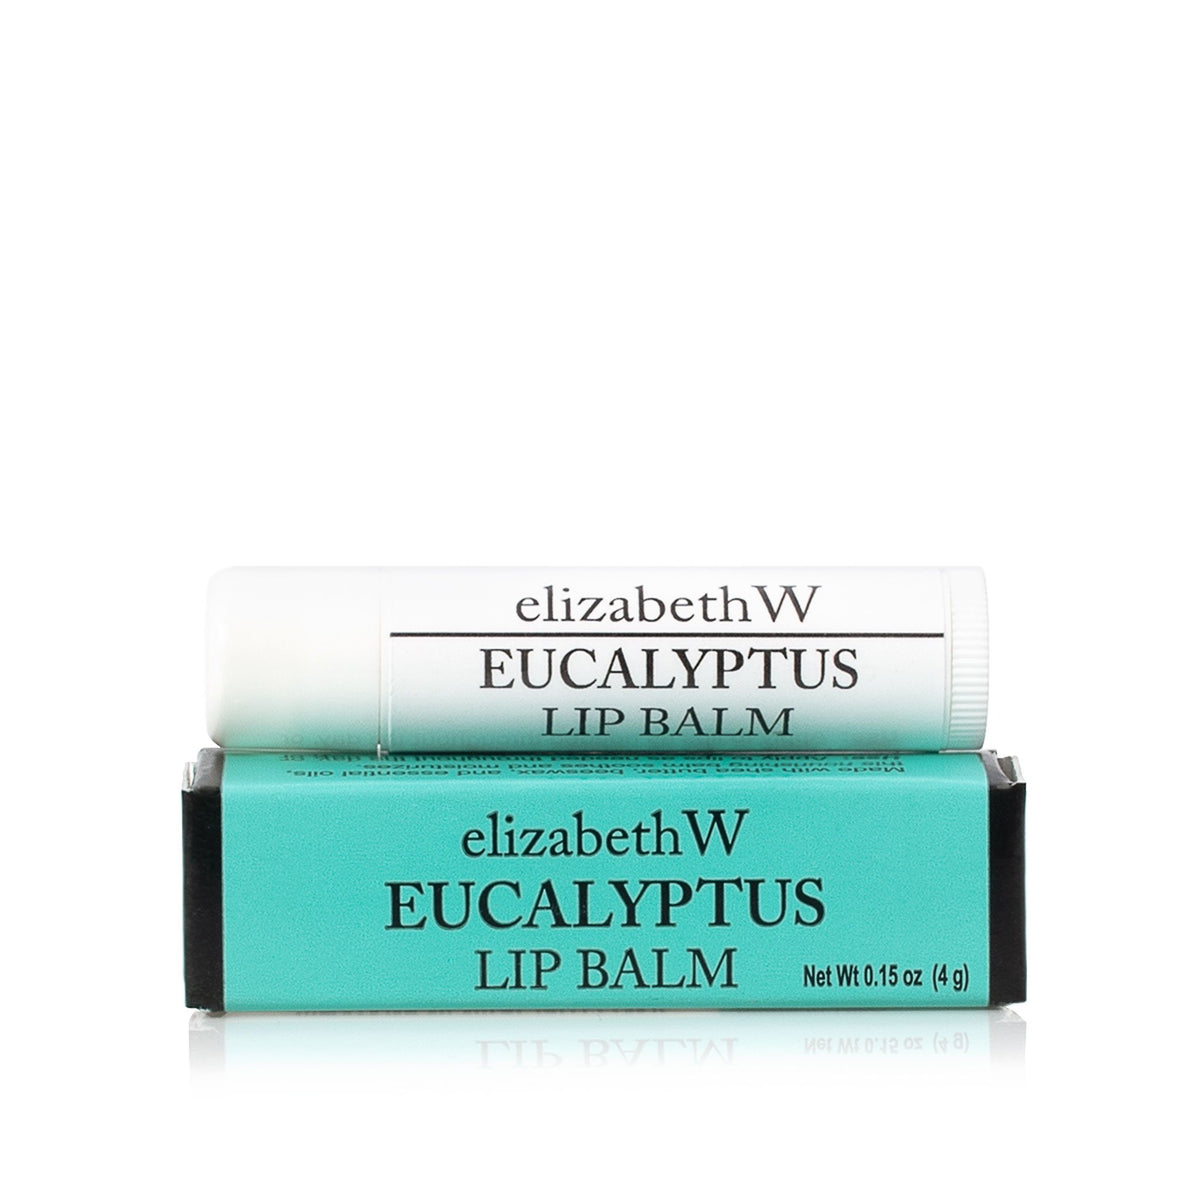 A tube of elizabeth W Botanical Apothecary Eucalyptus Lip Balm, enriched with shea butter, is positioned above its turquoise and black packaging, all set against a white background.